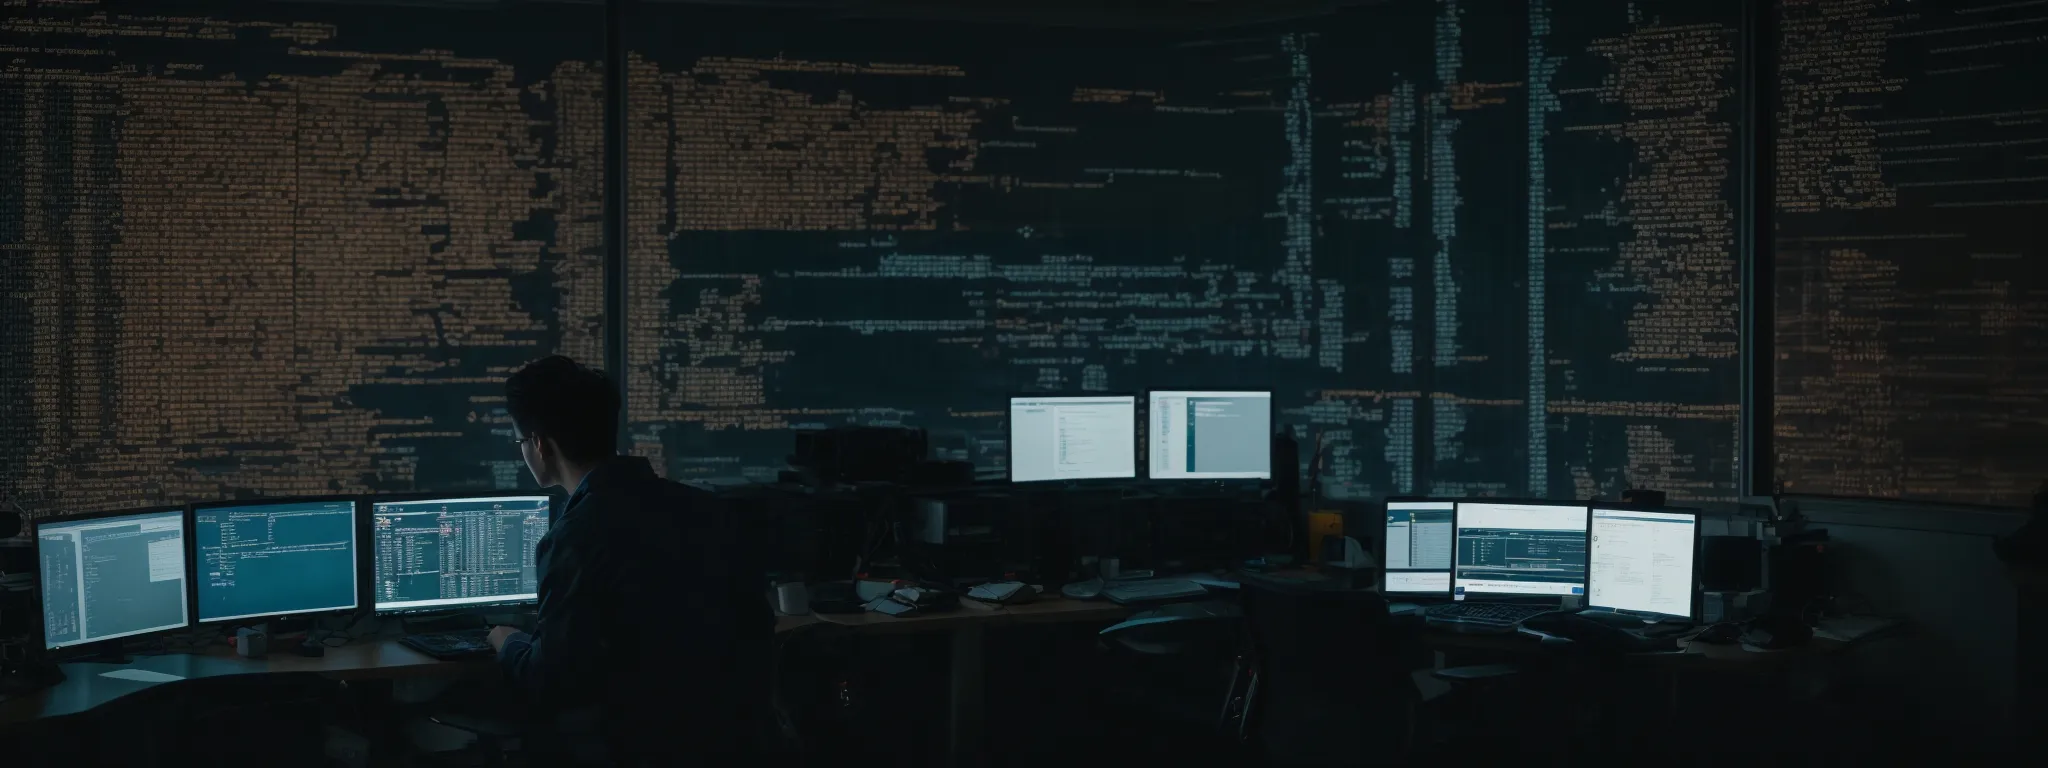 a programmer scrutinizes complex code on a computer screen in a dimly lit office, symbolizing the meticulous process of automating technical seo audits with python.